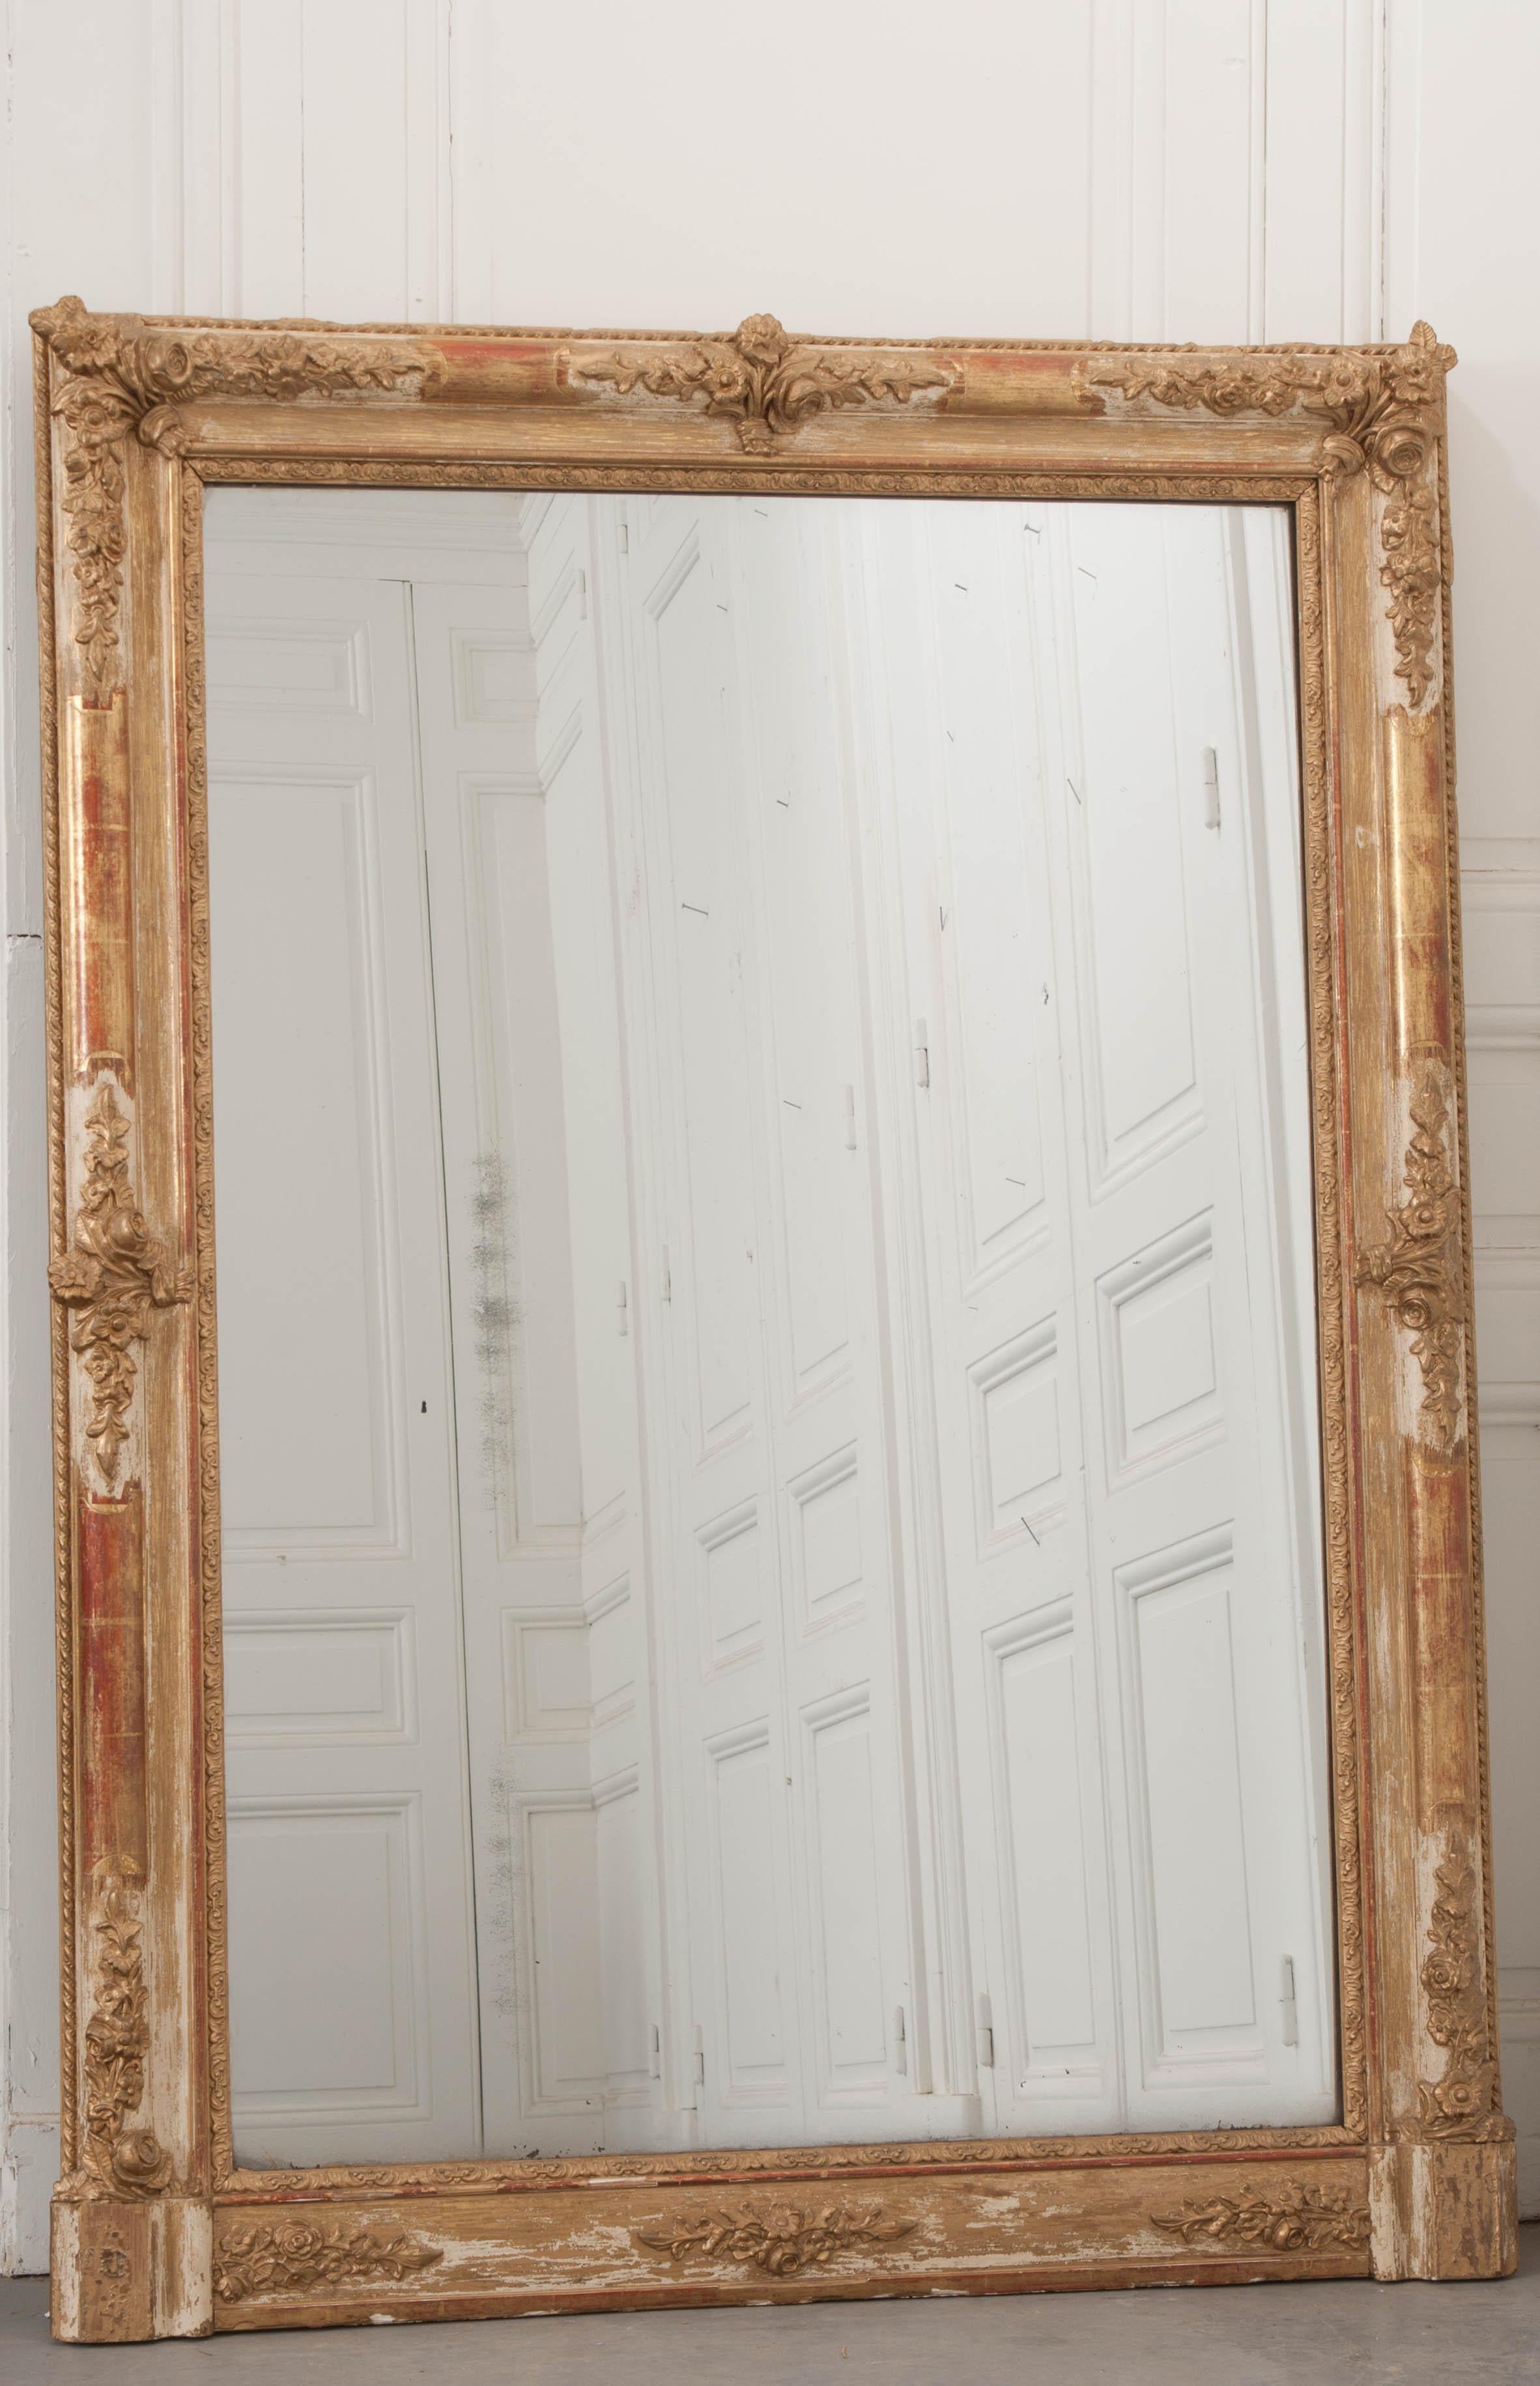 A brilliant 19th century giltwood over-mantle mirror, made in France circa 1870. The mirror is large and beautiful. The frame is ornamented with bundles of flowers that can be found in its corners and sides. The gilt finish has experienced some loss